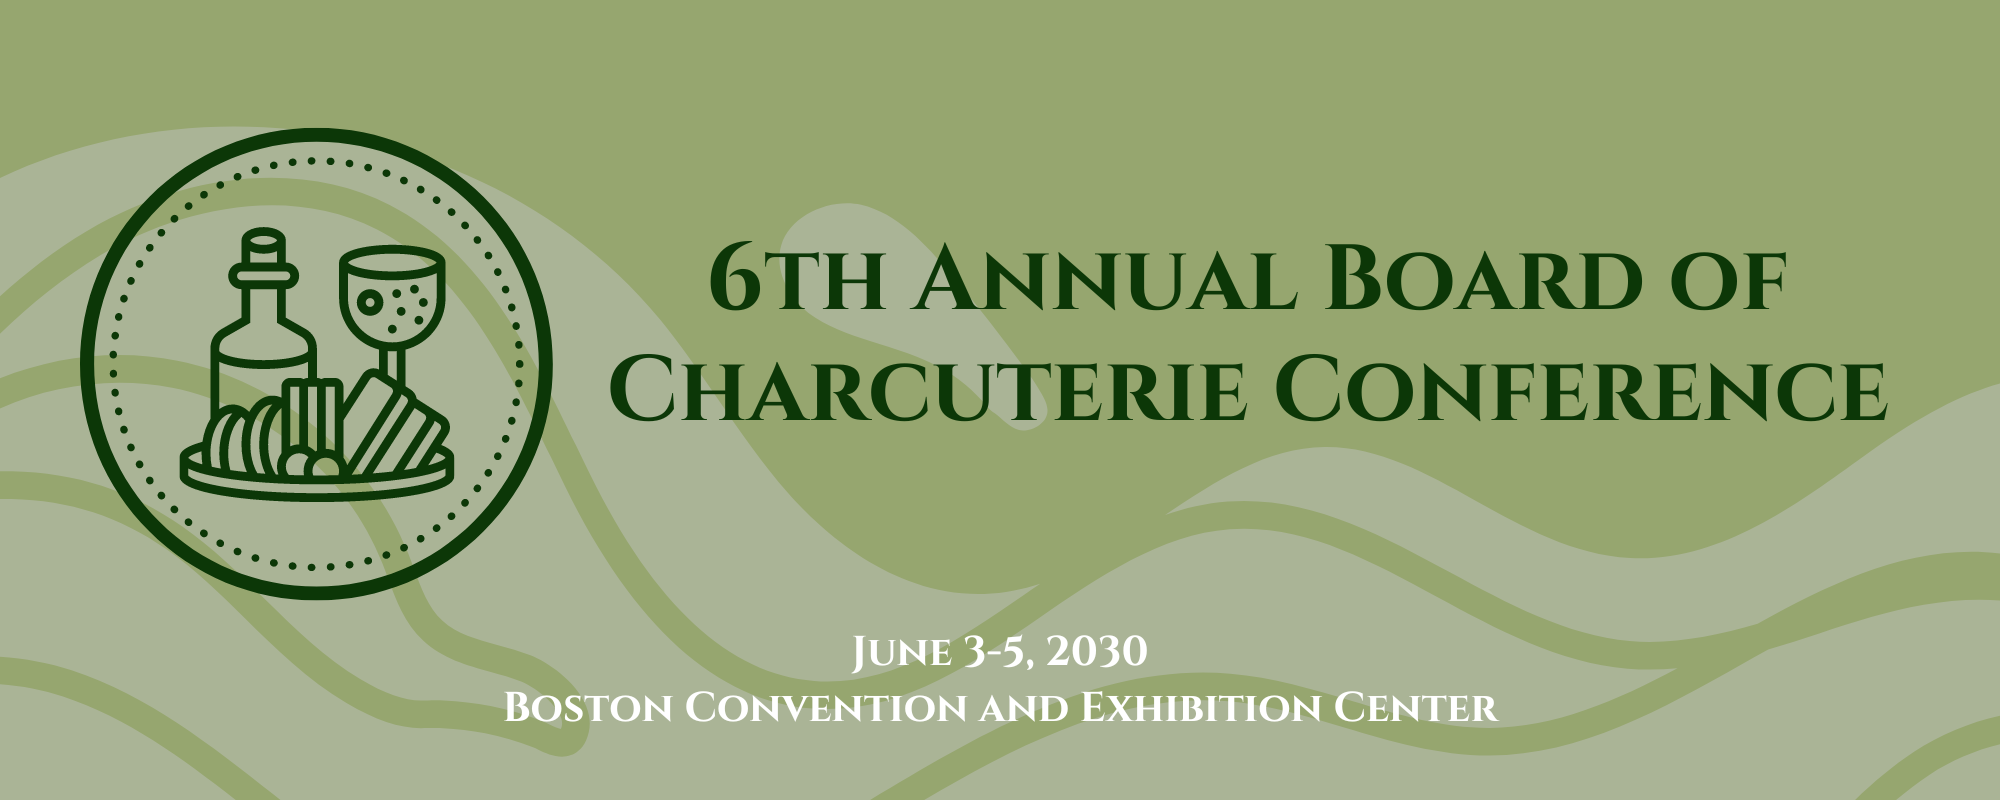 6th Annual Board of Charcuterie Conference